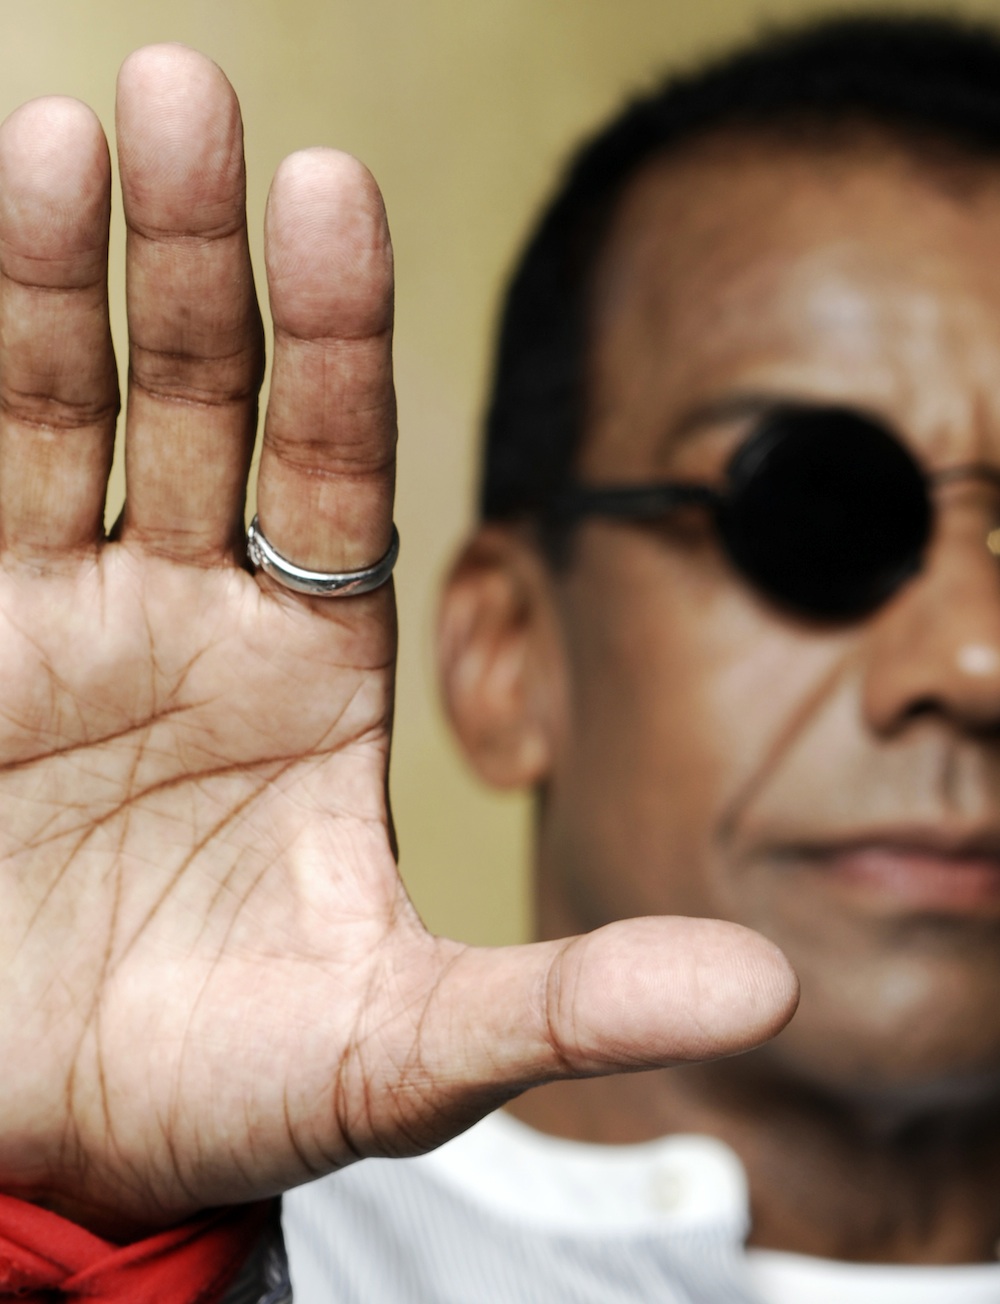 The living legend, live in Rio de Janeiro on May 14th and 15th, Jorge Ben Jor, photo by Circo Voador.